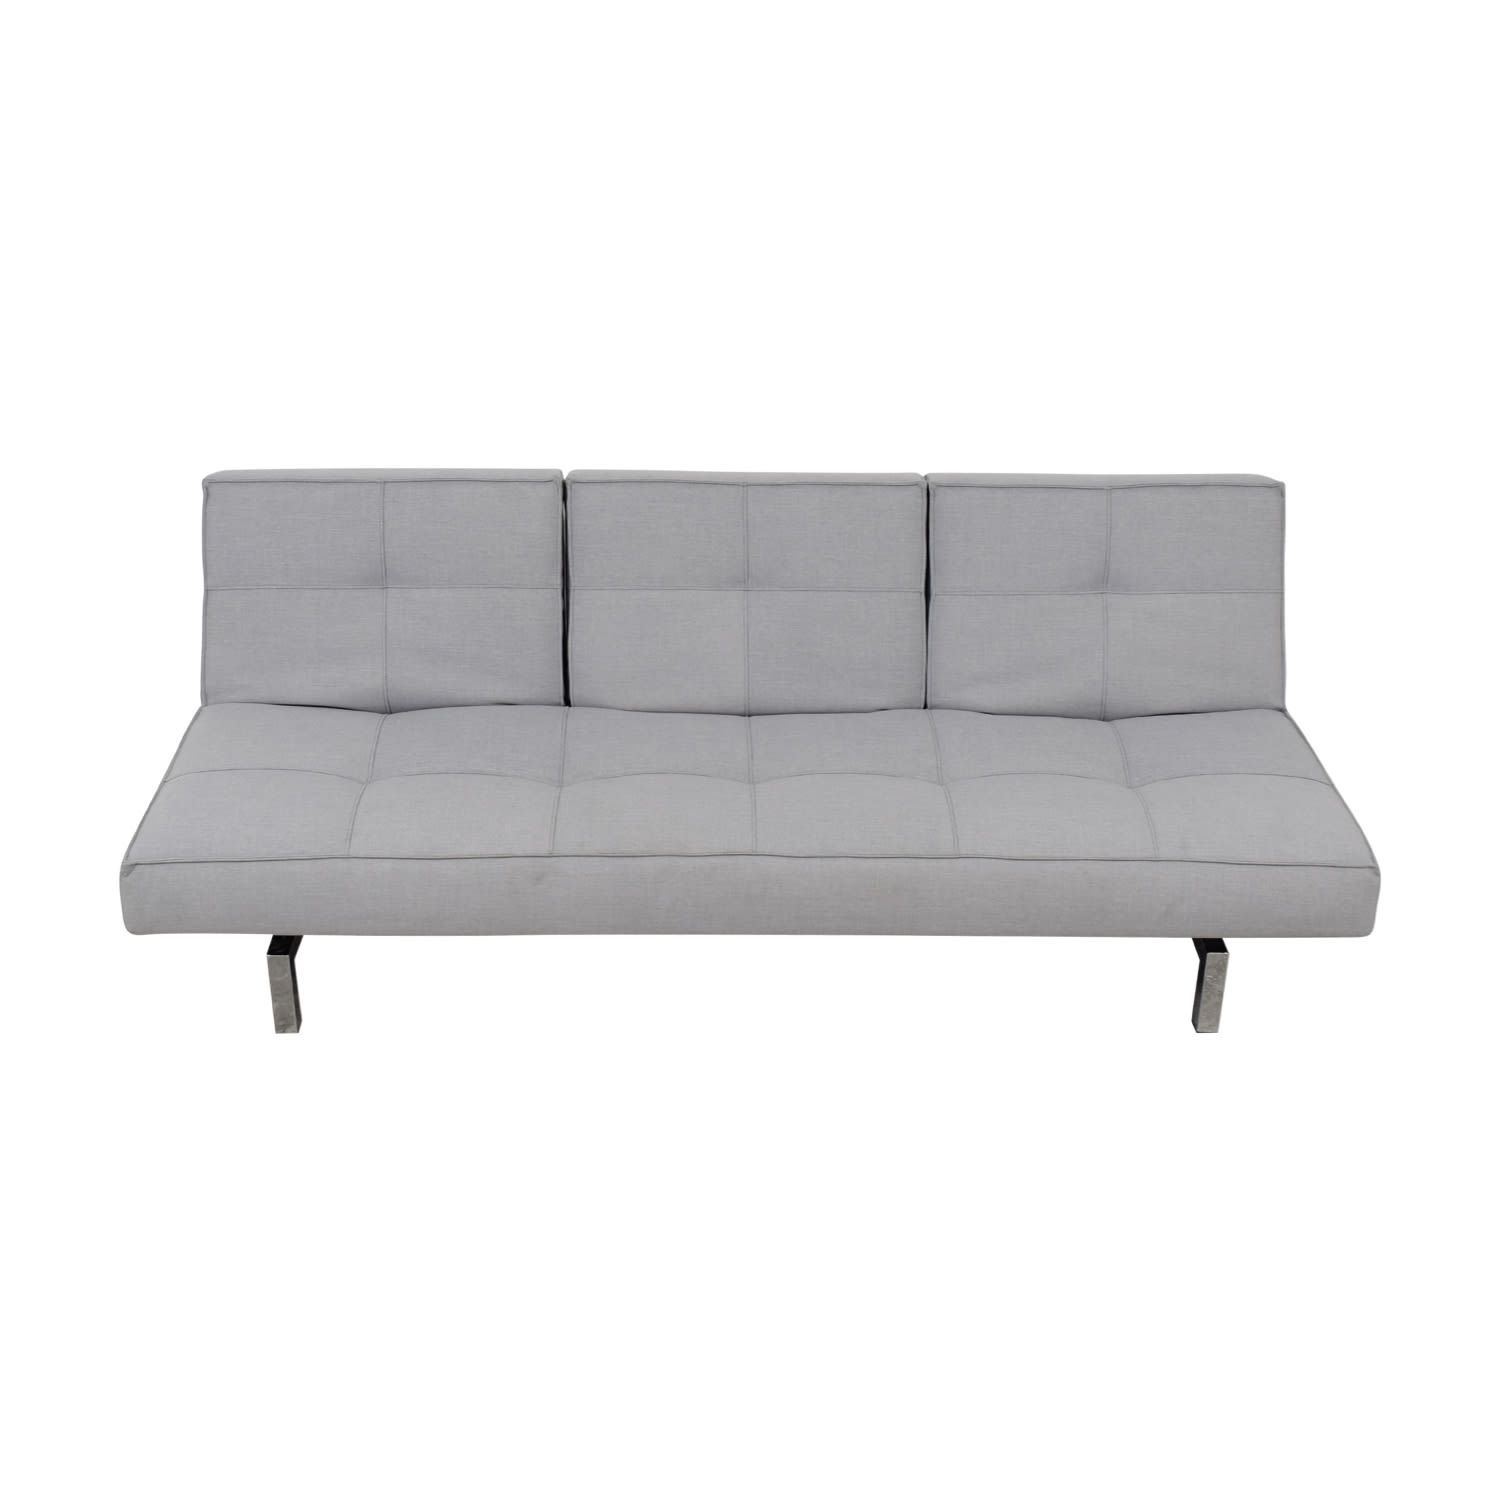 Innovation Convertible Grey Tufted Sleeper Sofa | 42% Off | Kaiyo With Tufted Convertible Sleeper Sofas (View 14 of 15)